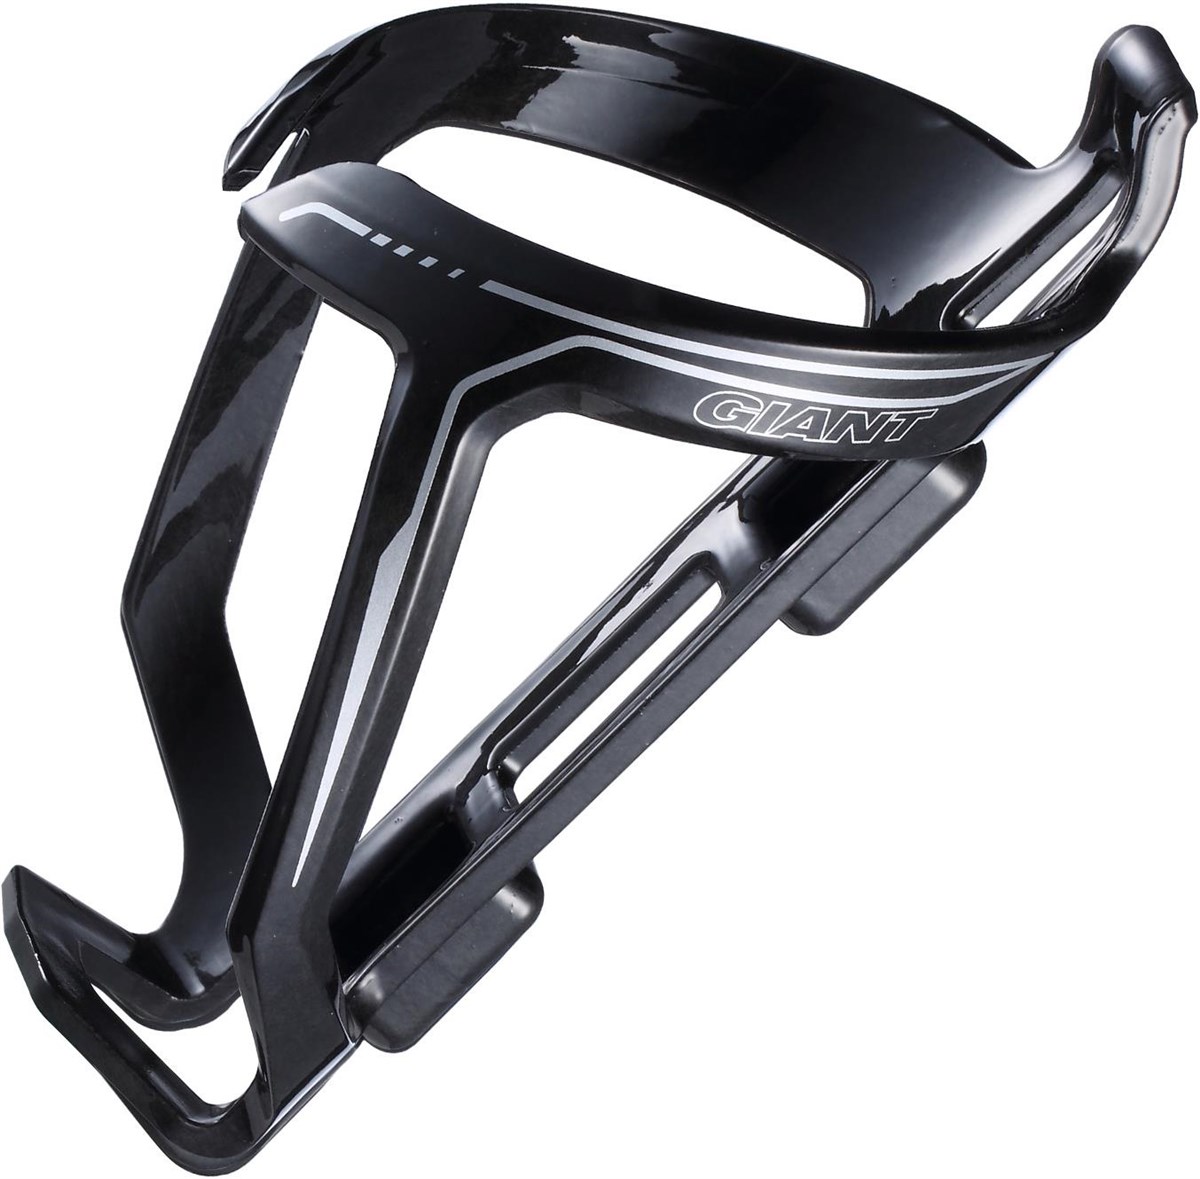 Giant Proway Composite Water Bottle Cage product image